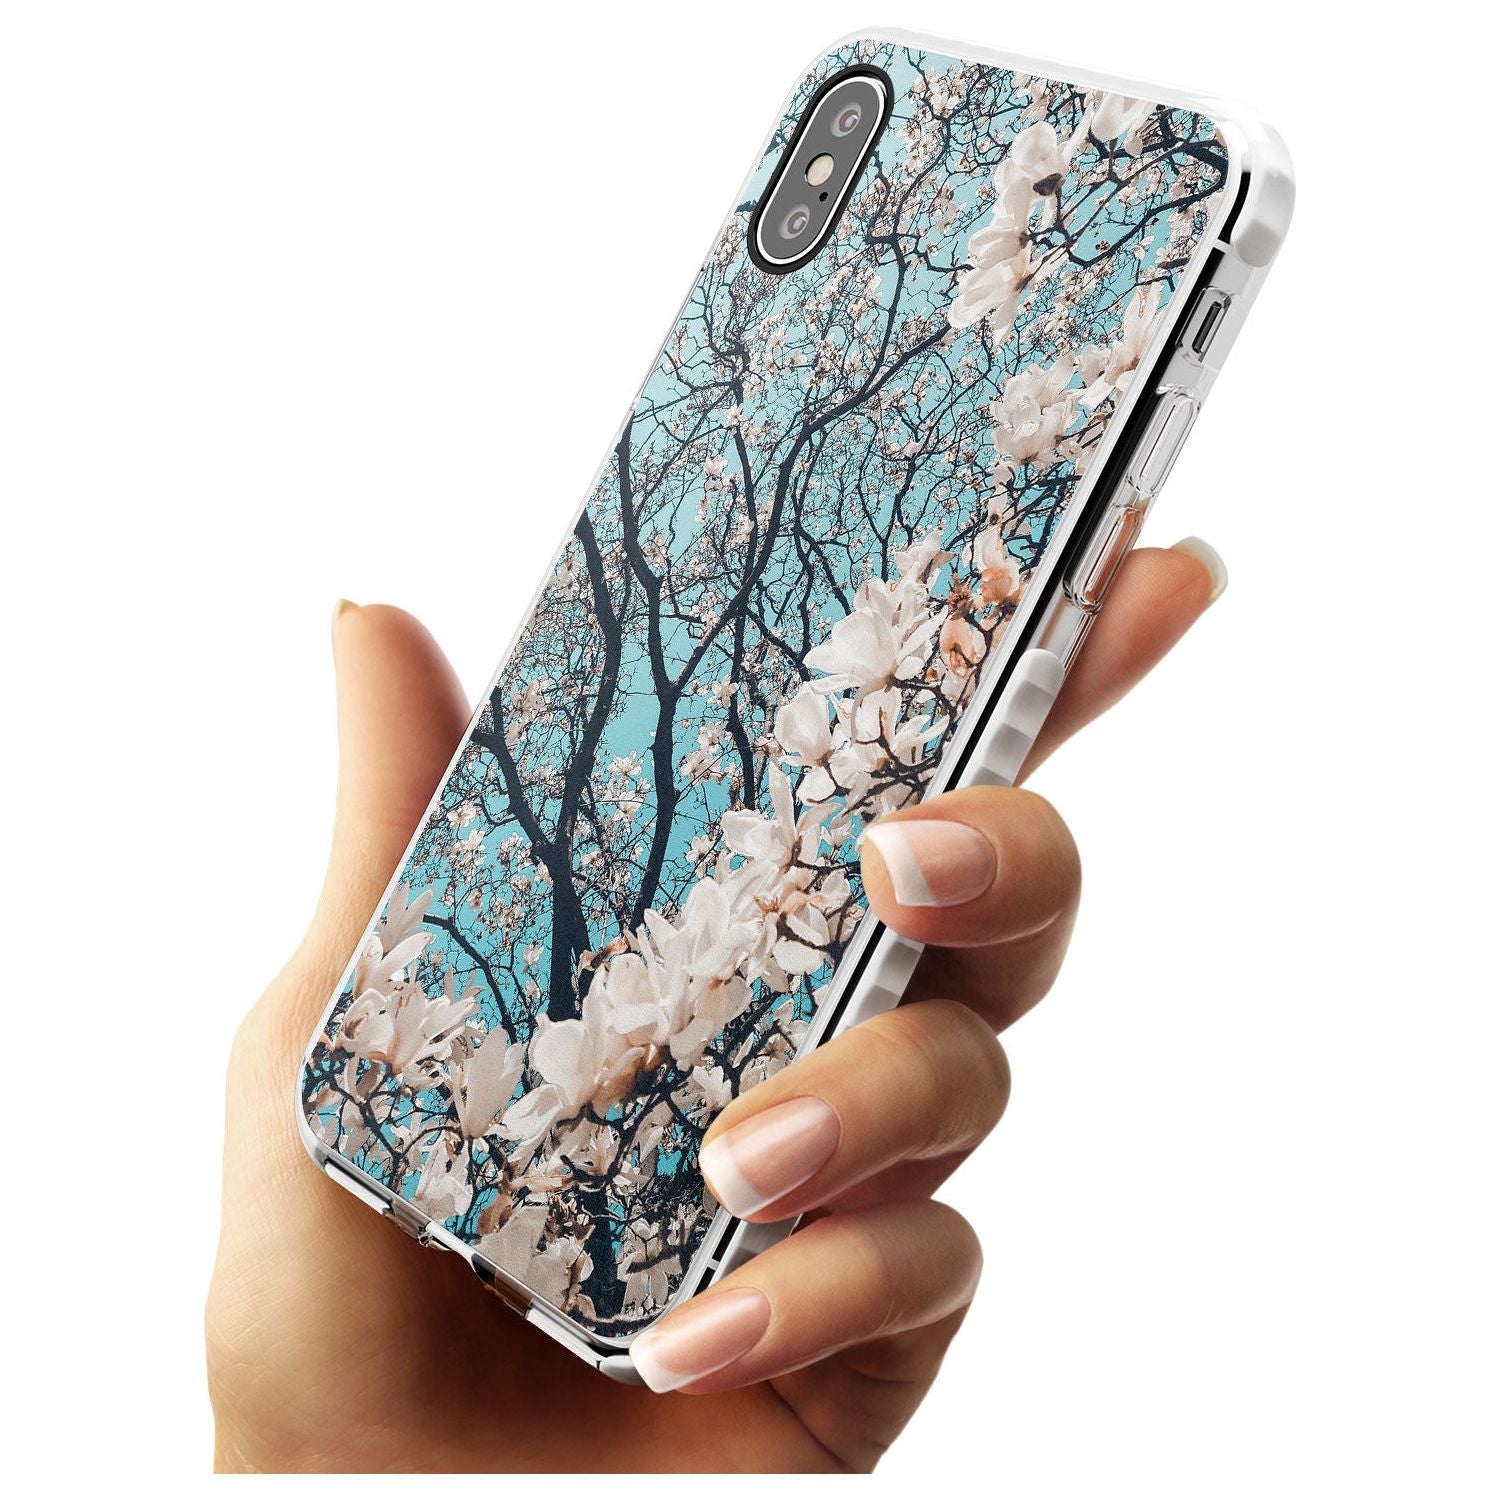 Magnolia Tree Photograph Impact Phone Case for iPhone X XS Max XR